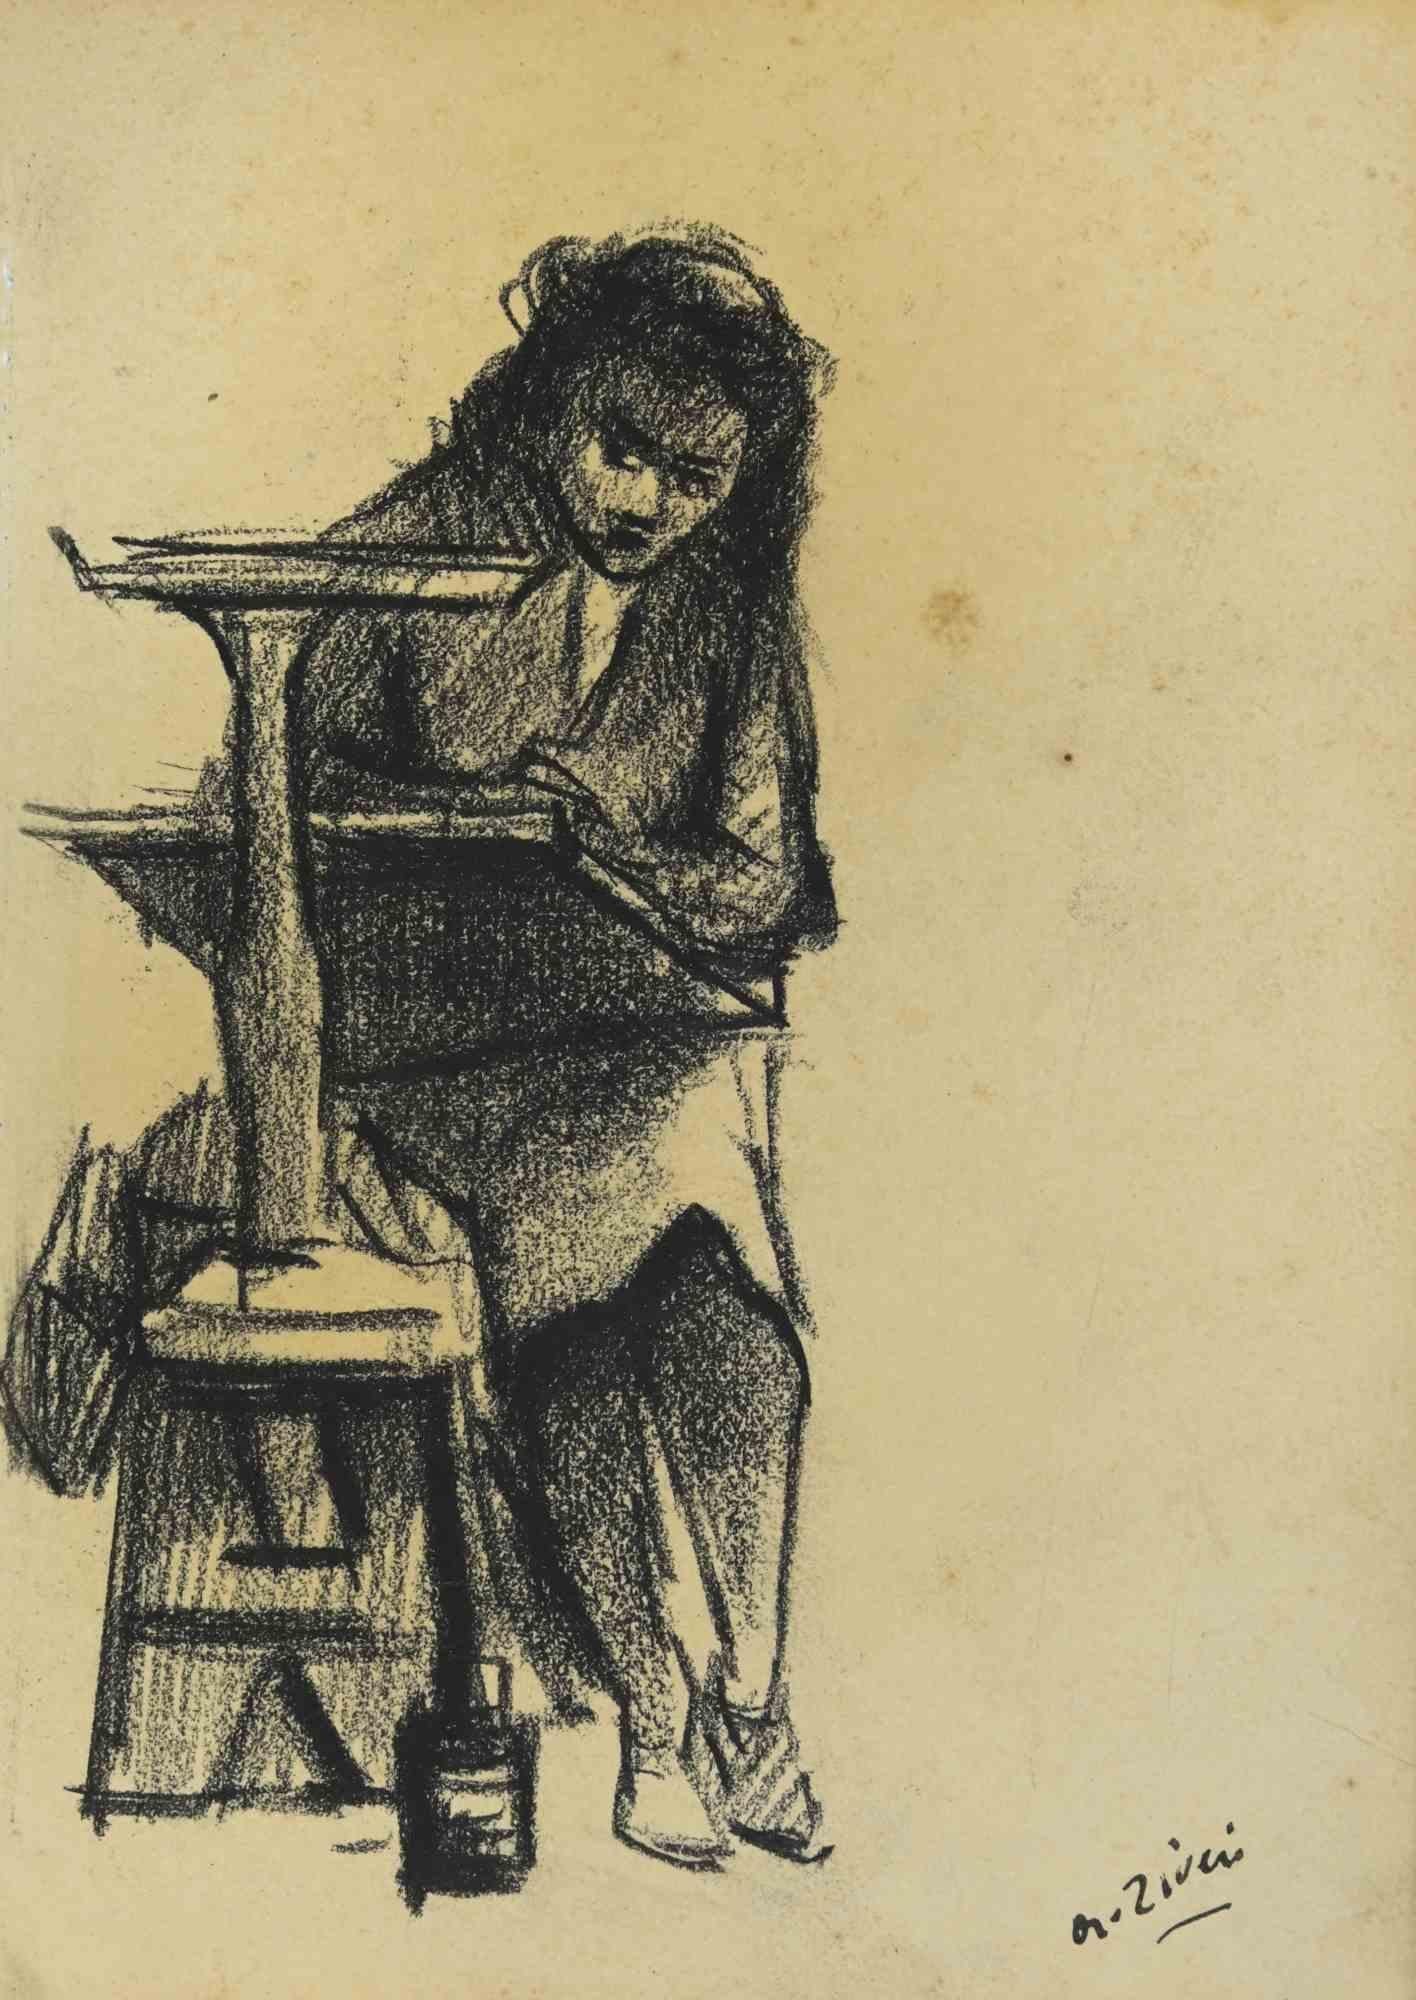 Painter is a drawing realized by Alberto Ziveri in the 1930s.

Charcoal on paper.

Hand-signed.

In good conditions with slight foxing.

The artwork is represented through deft strokes masterly.

Alberto Ziveri (Rome,1908 – 1990), the Italian